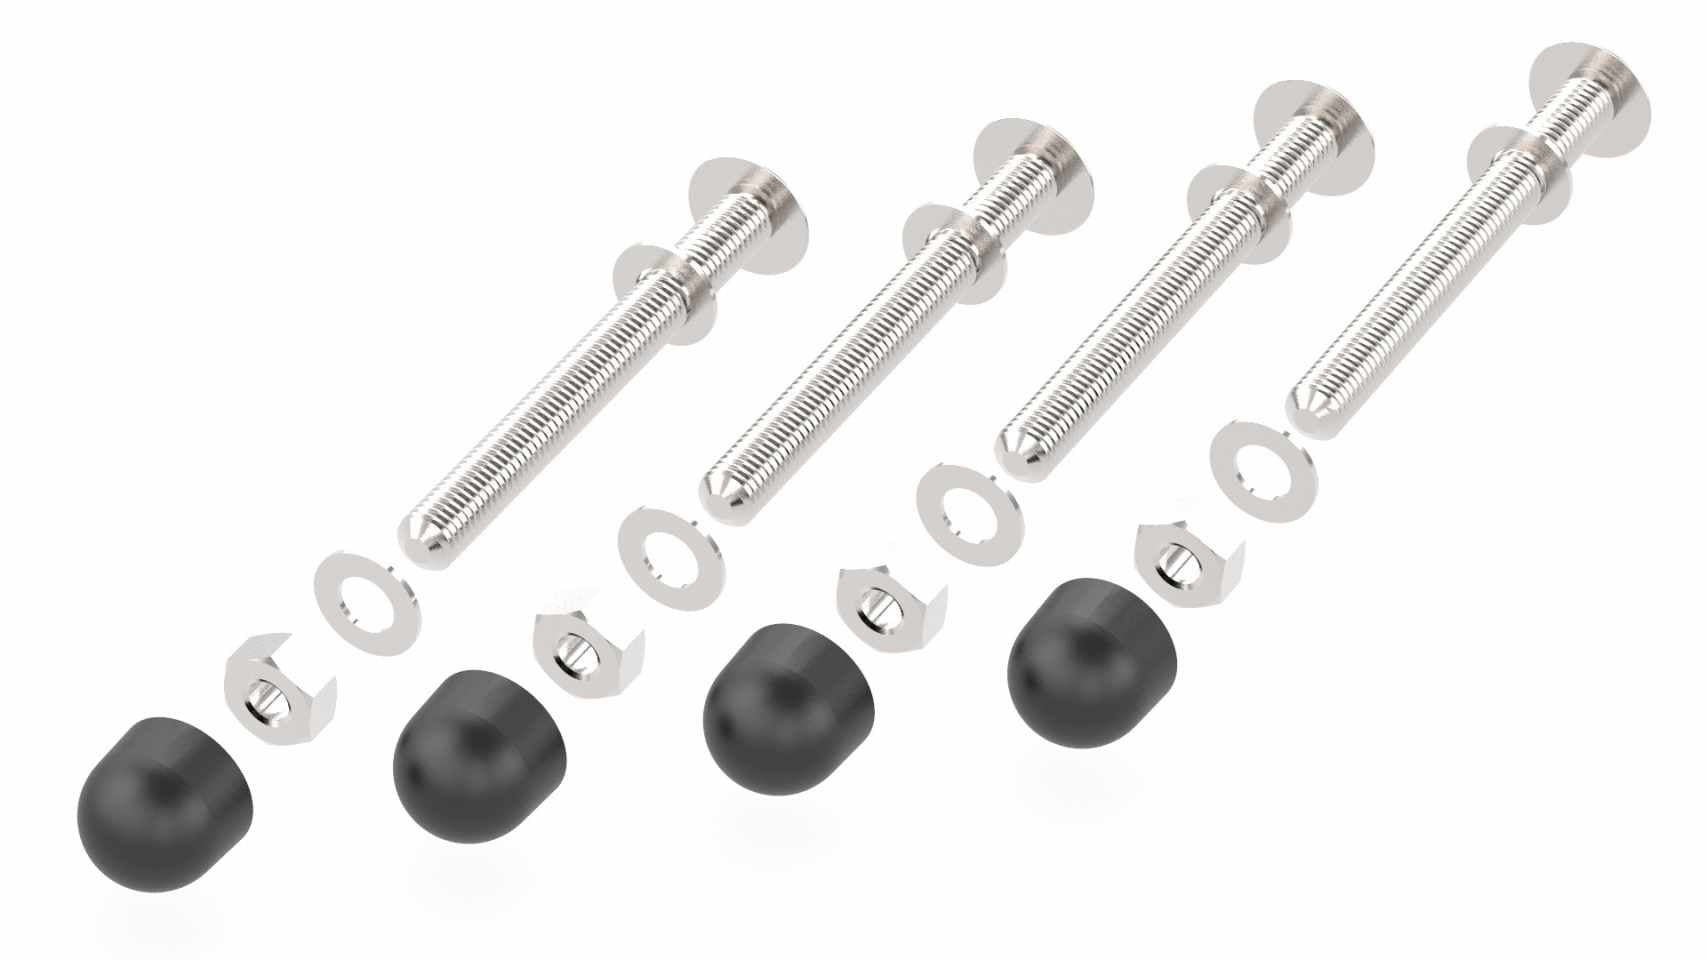 Axle Screw Set 64 - Roll and Pole